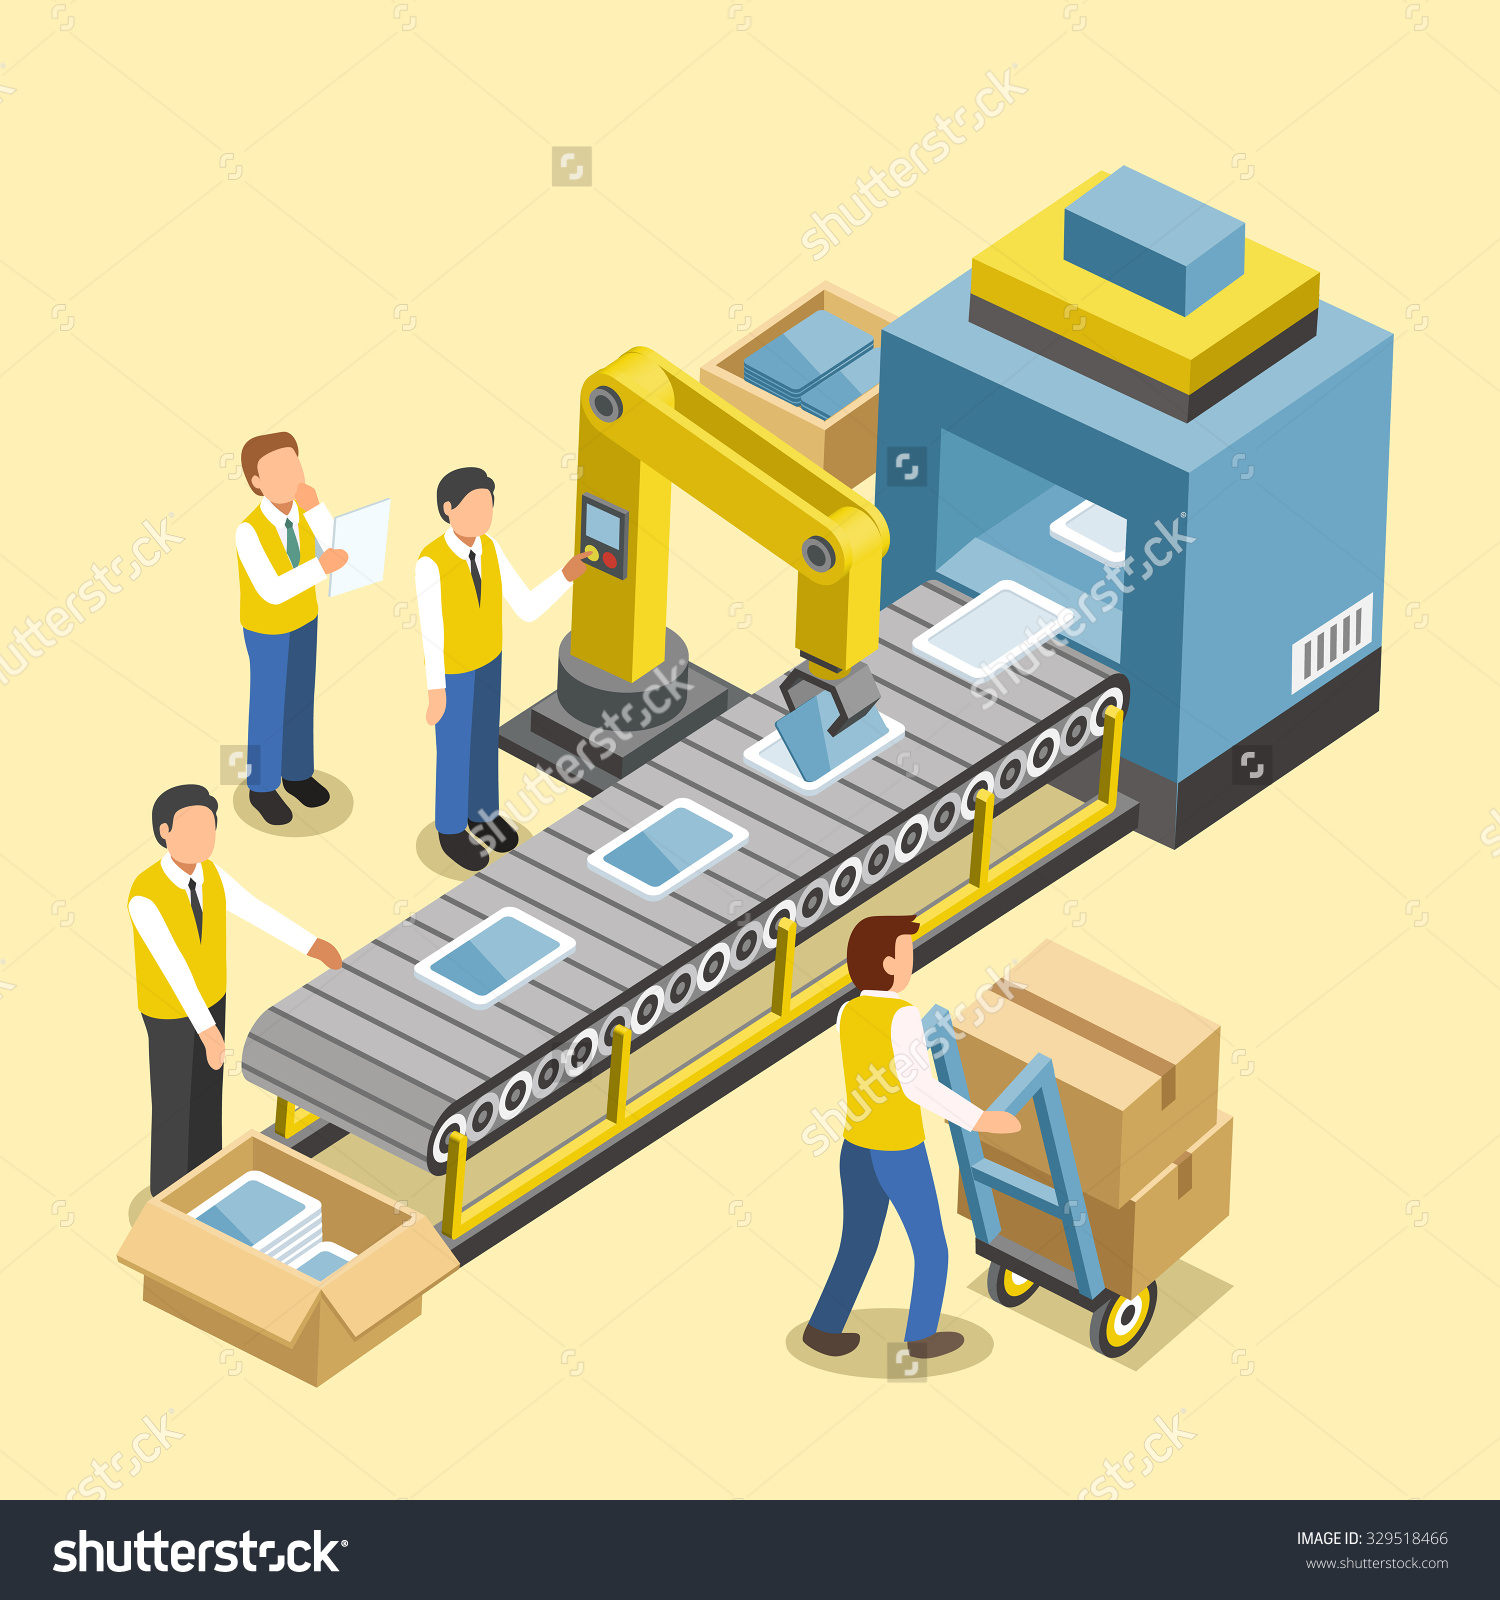 clipart production worker - photo #11